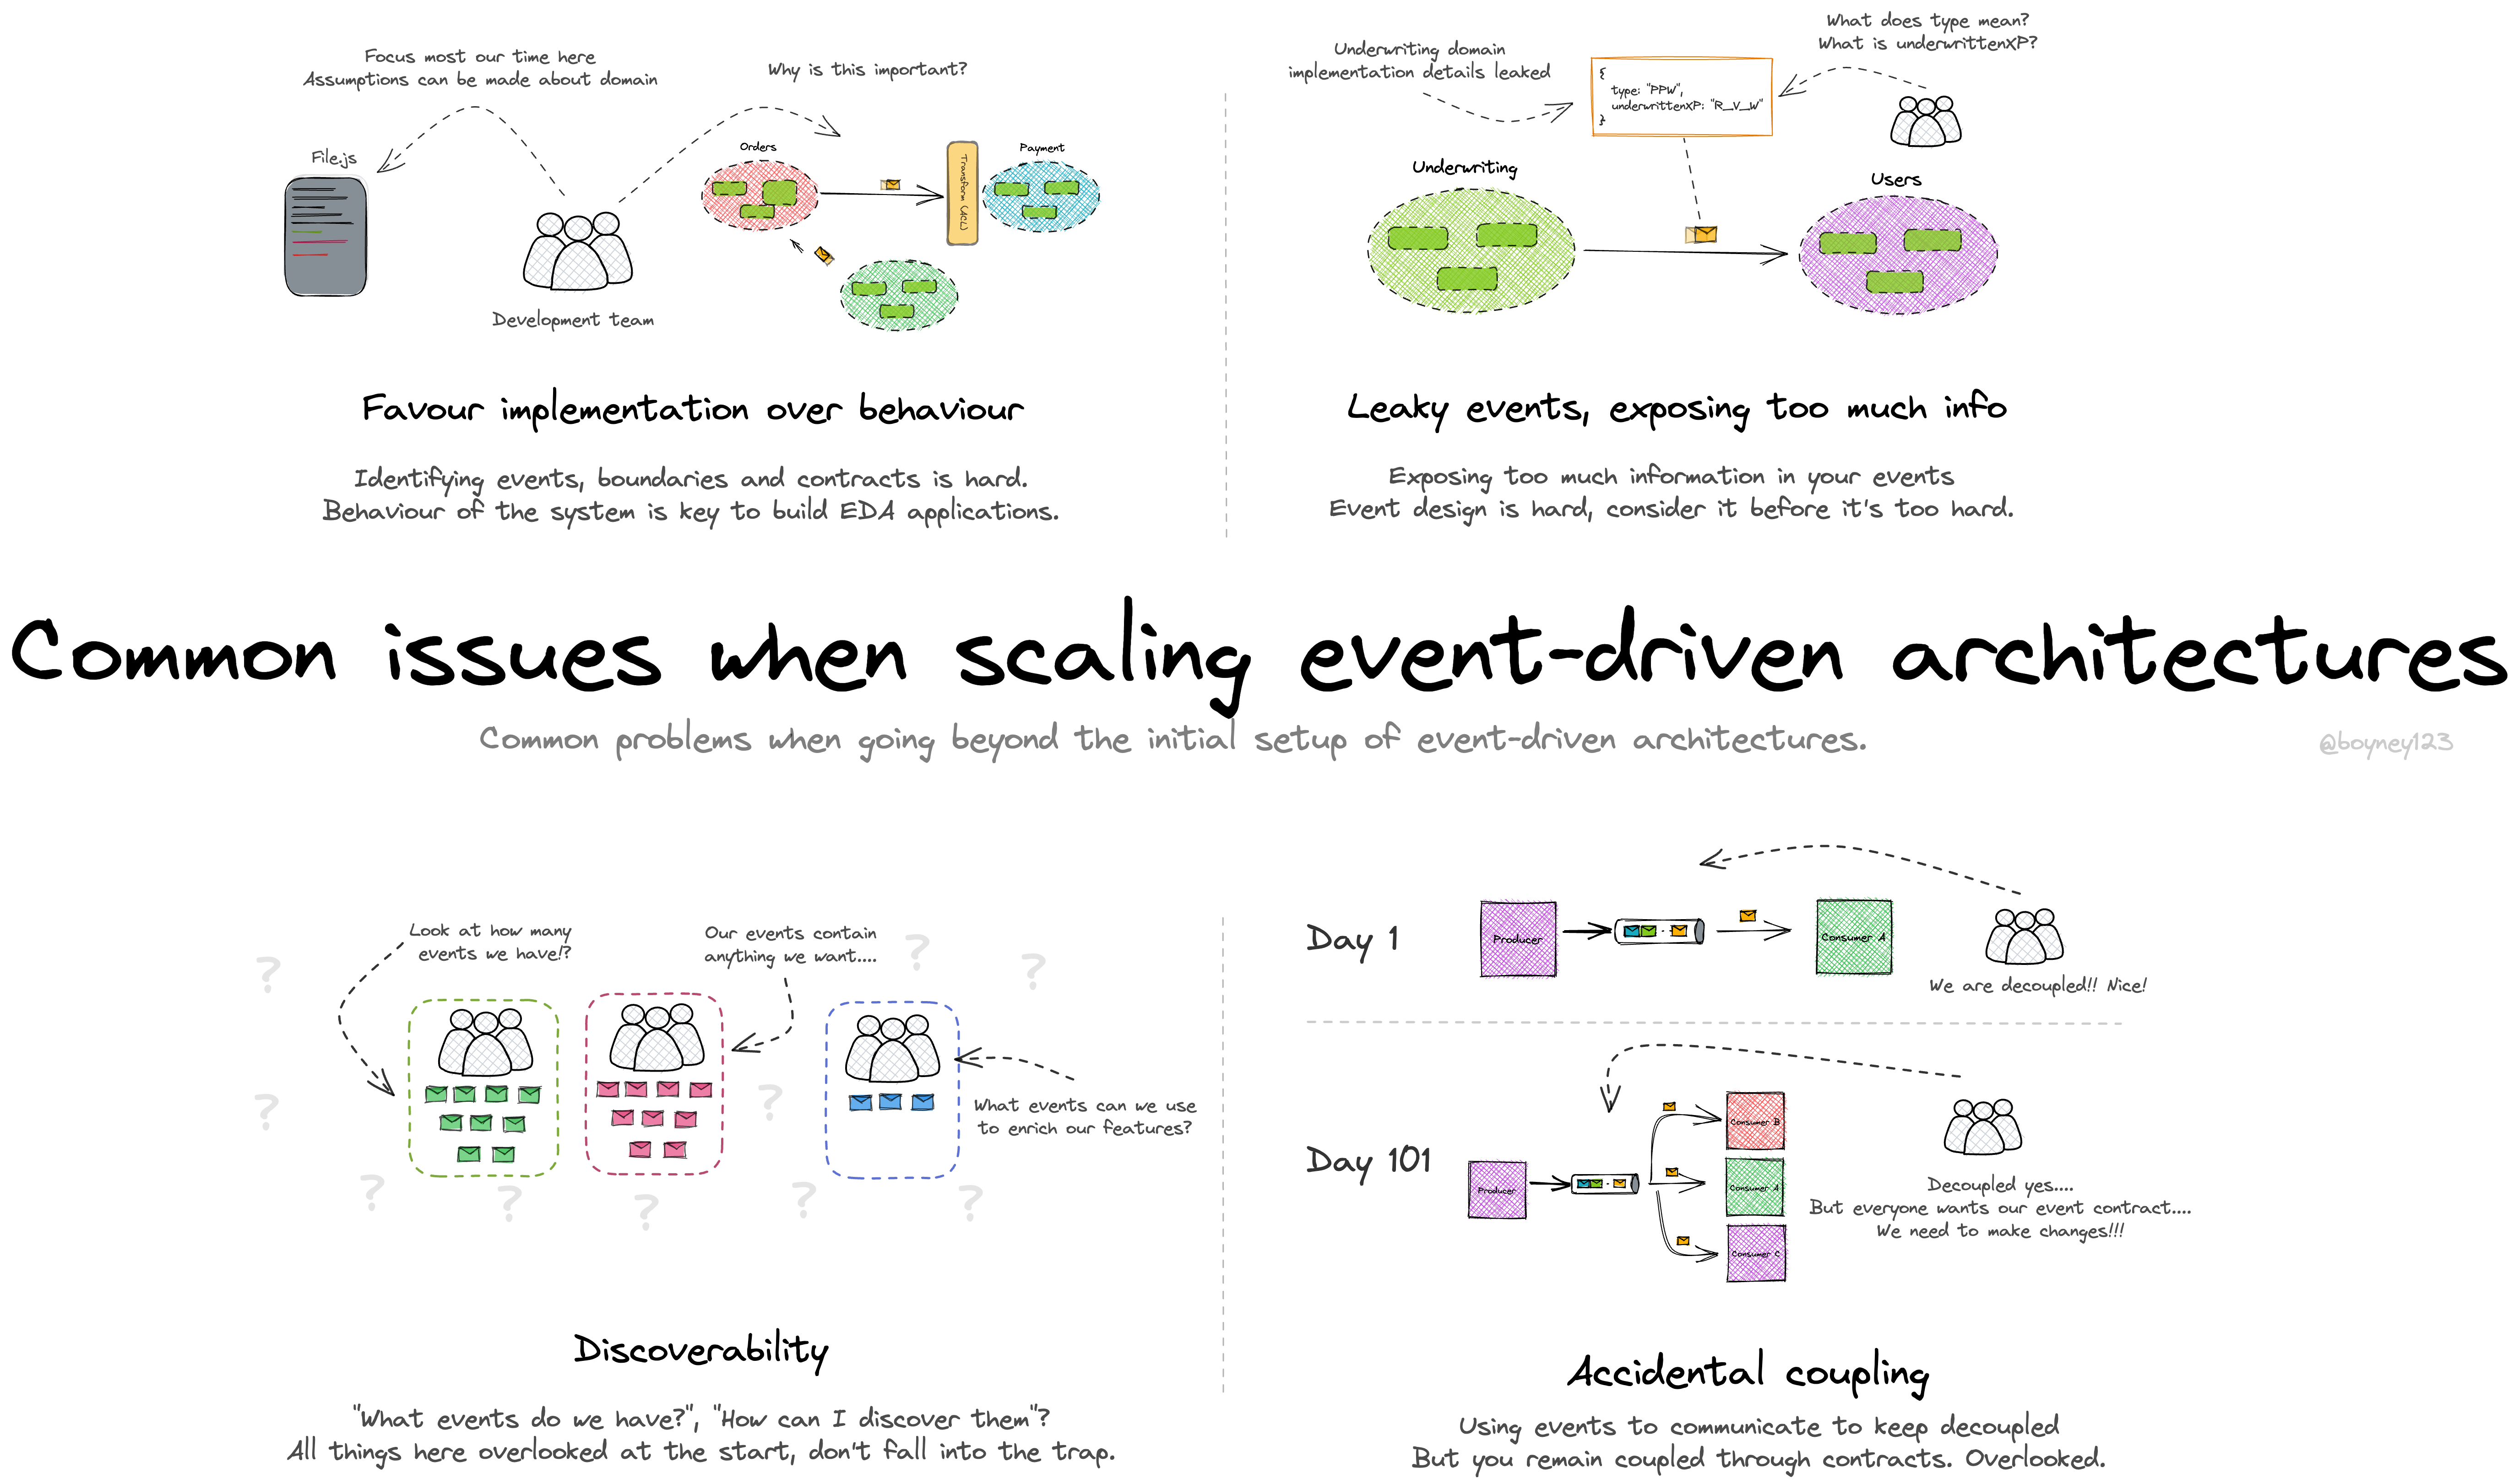 Common issues when scaling event-driven architectures